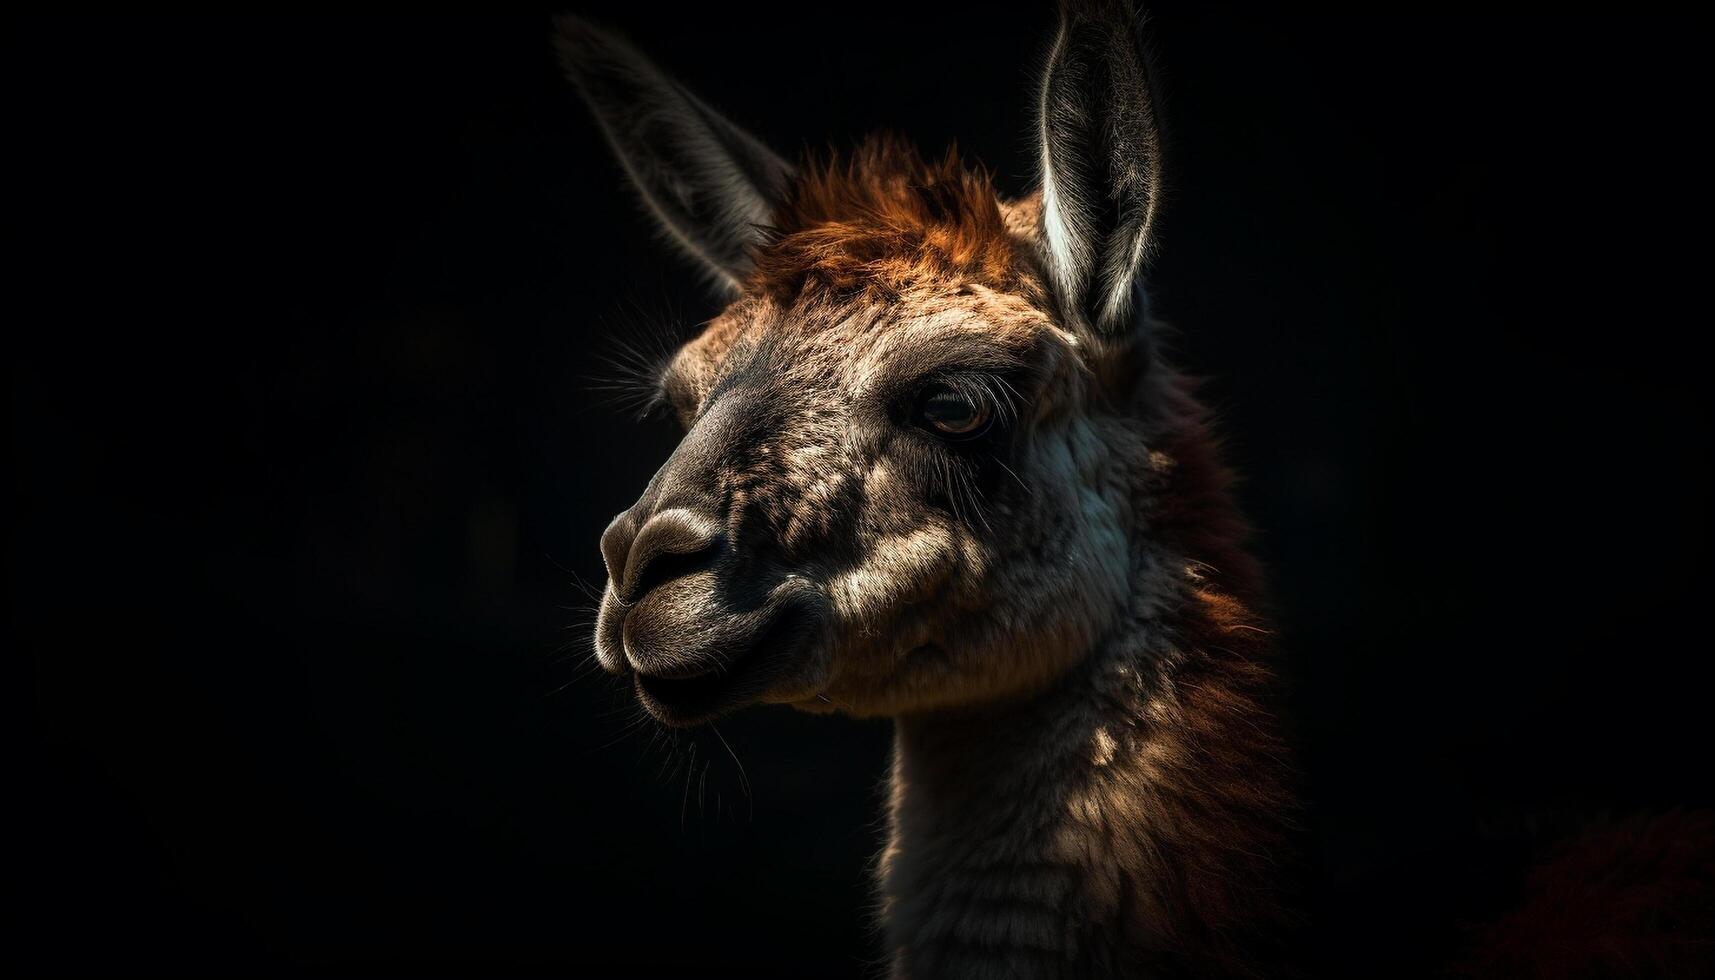 Cute alpaca portrait, looking at camera with fluffy fur generated by AI photo